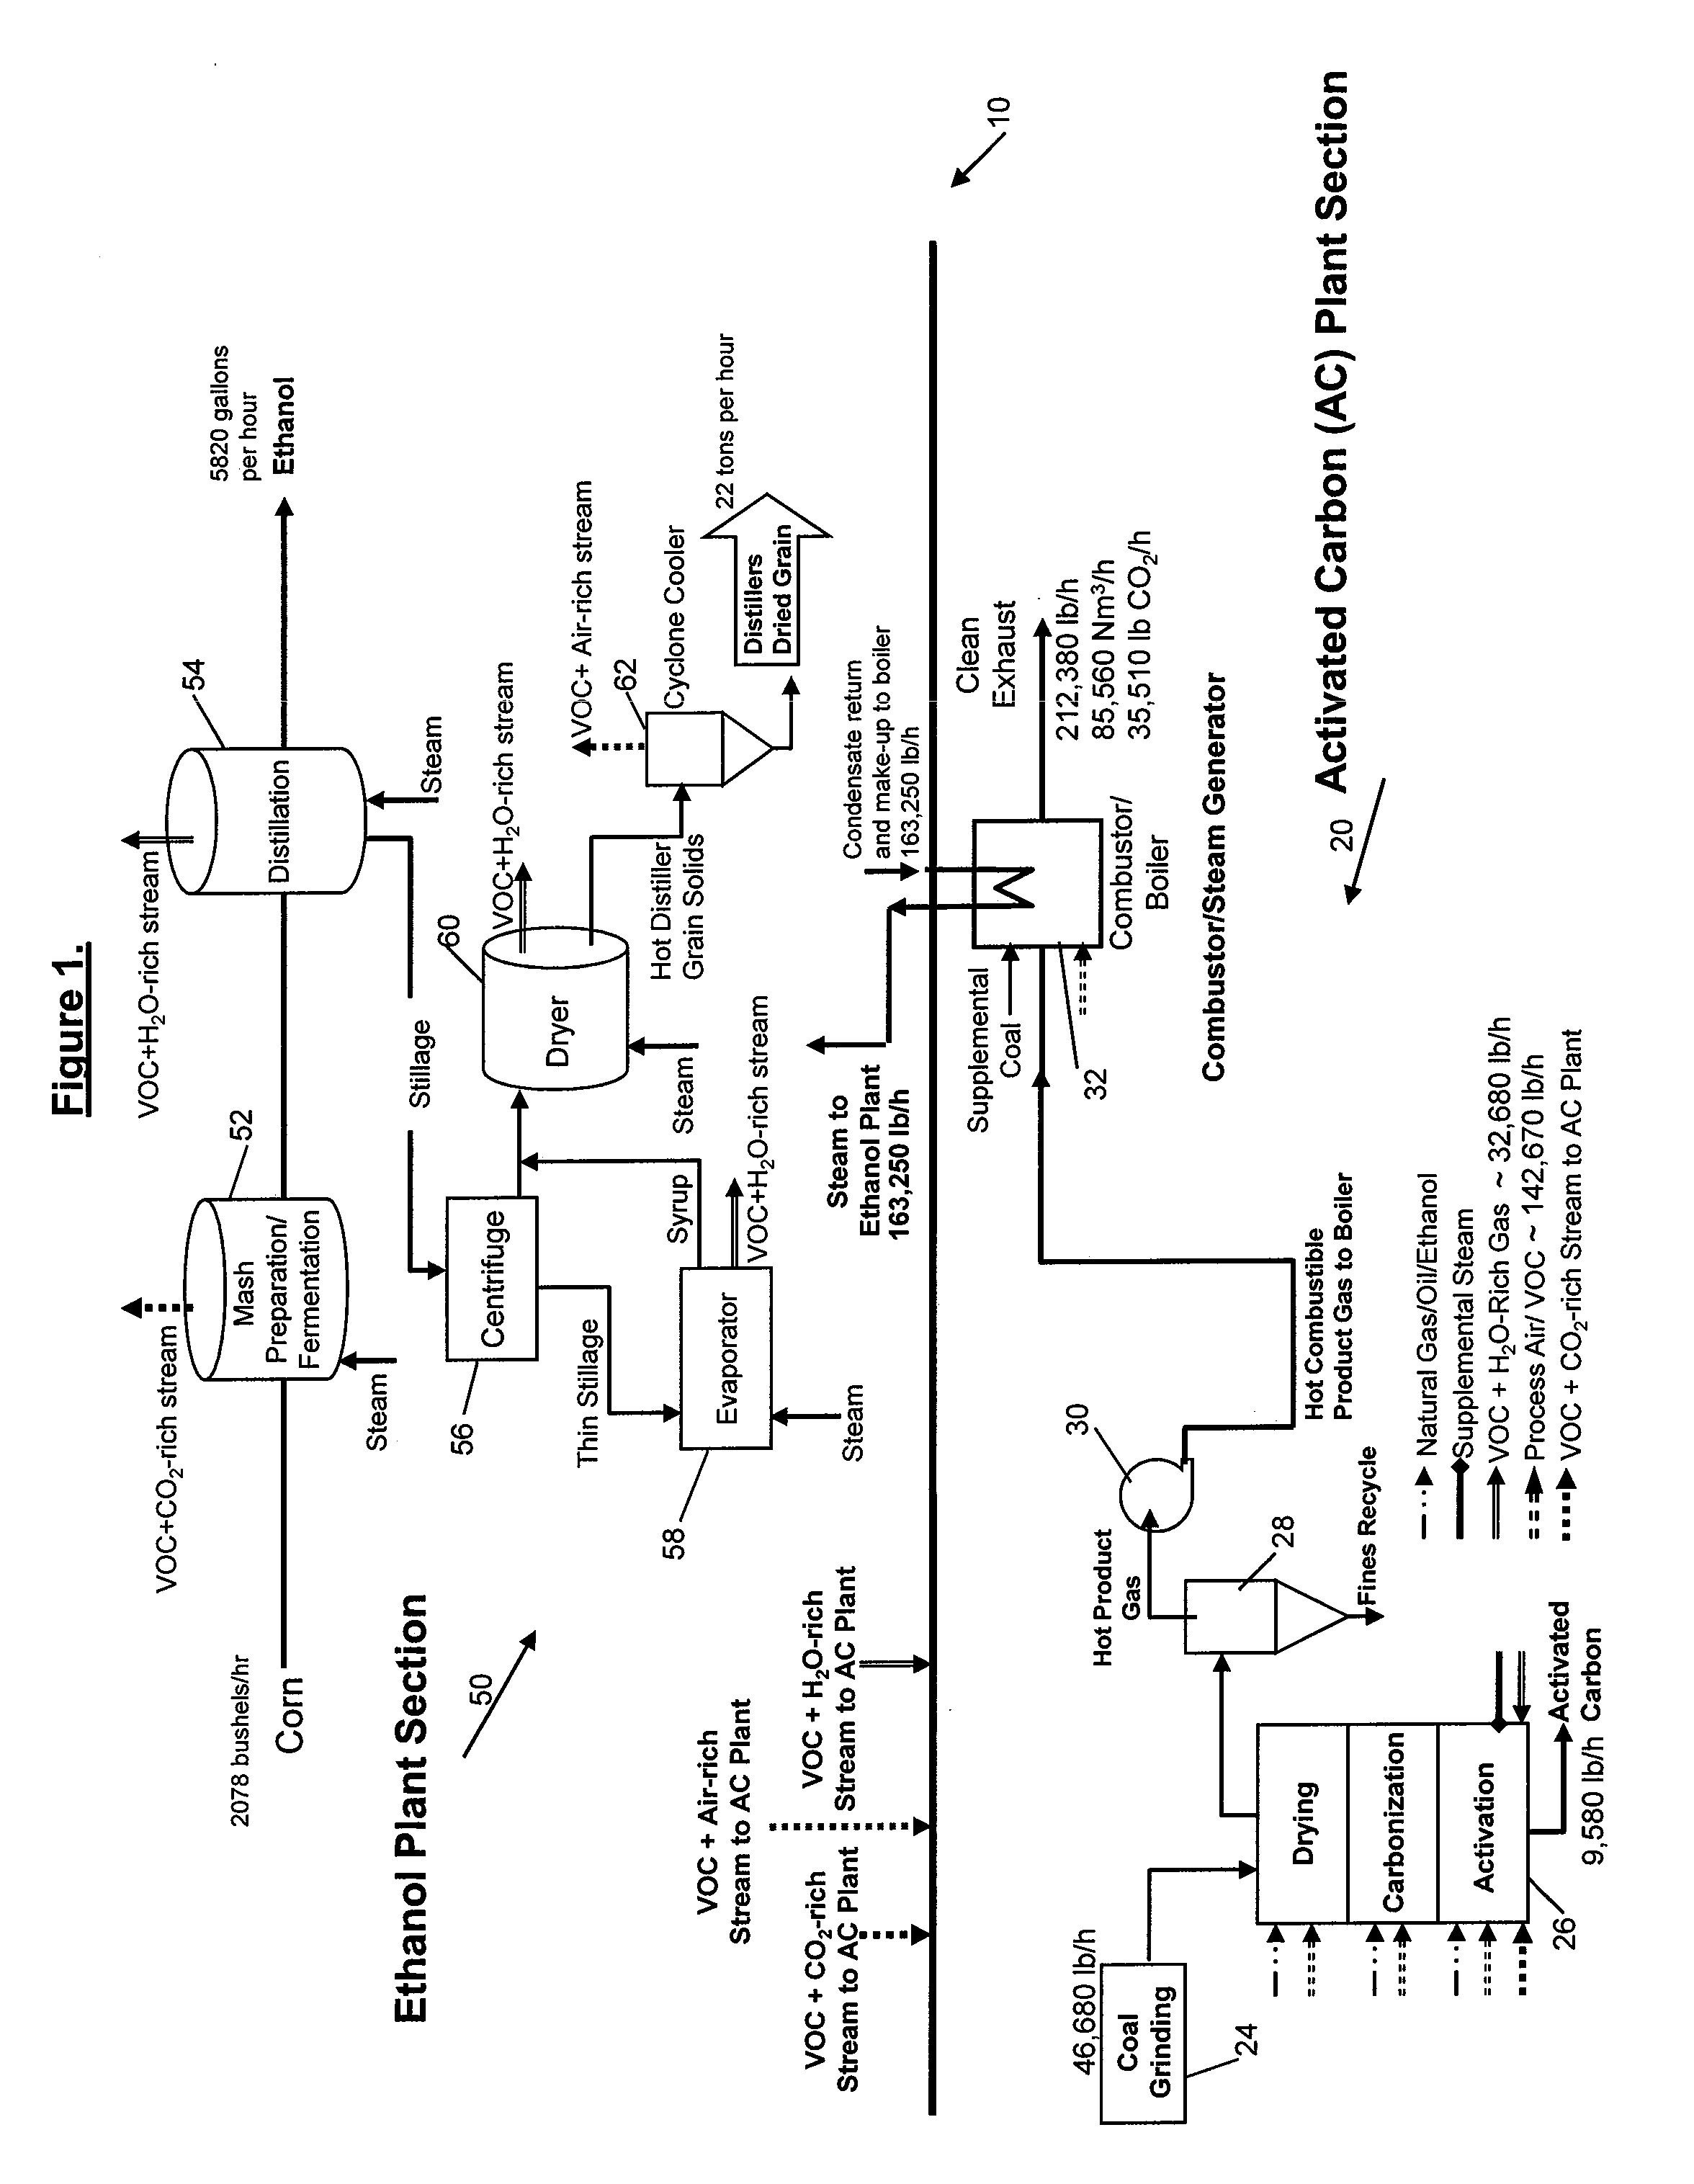 Method of Manufacturing Carbon-Rich Product and Co-Products